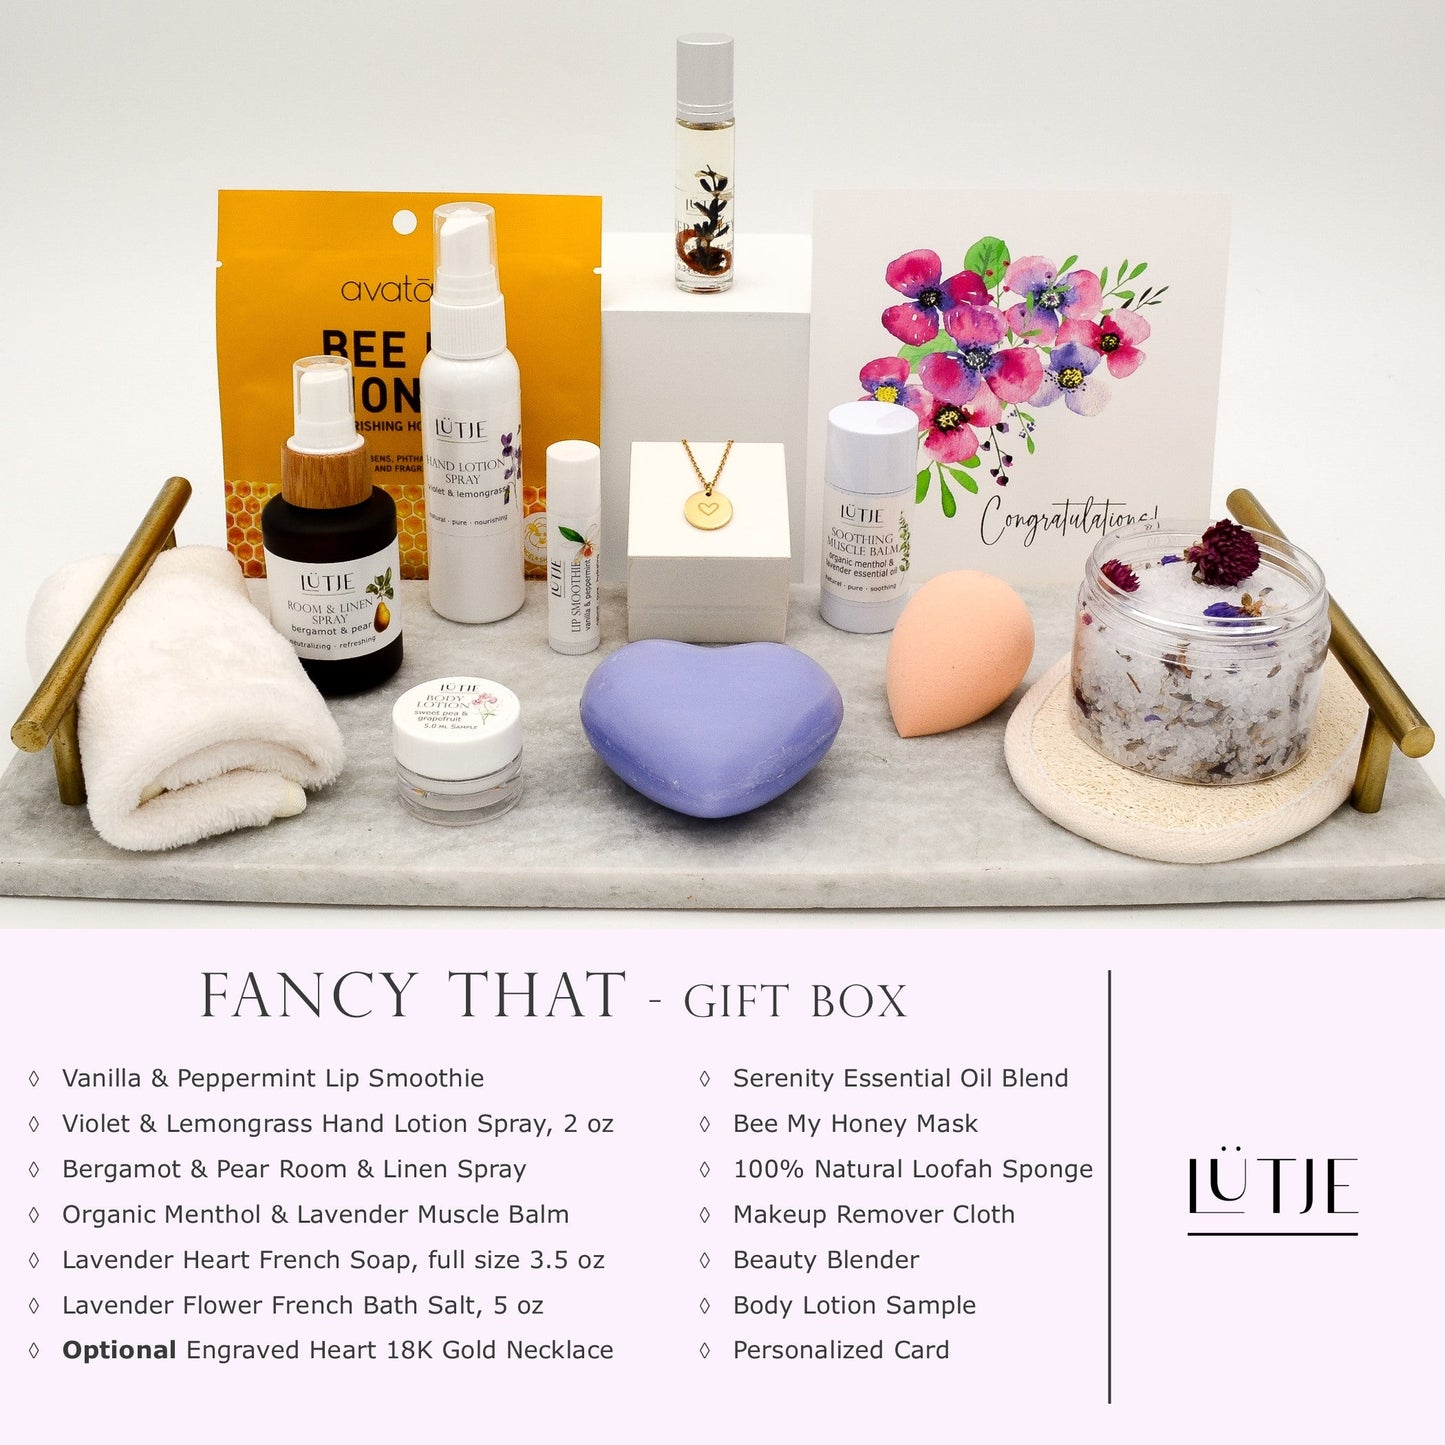 Fancy That Gift Box for women, BFF, wife, daughter, sister, mom, or grandma, includes Violet & Lemongrass hand lotion spray, essential oil, lip balm, soothing muscle balm, Bergamot & Pear room & linen spray, French soap, French bath salts, hydrating face mask, other bath, spa and self-care items, and optional 18K gold-plated necklace with engraved heart.